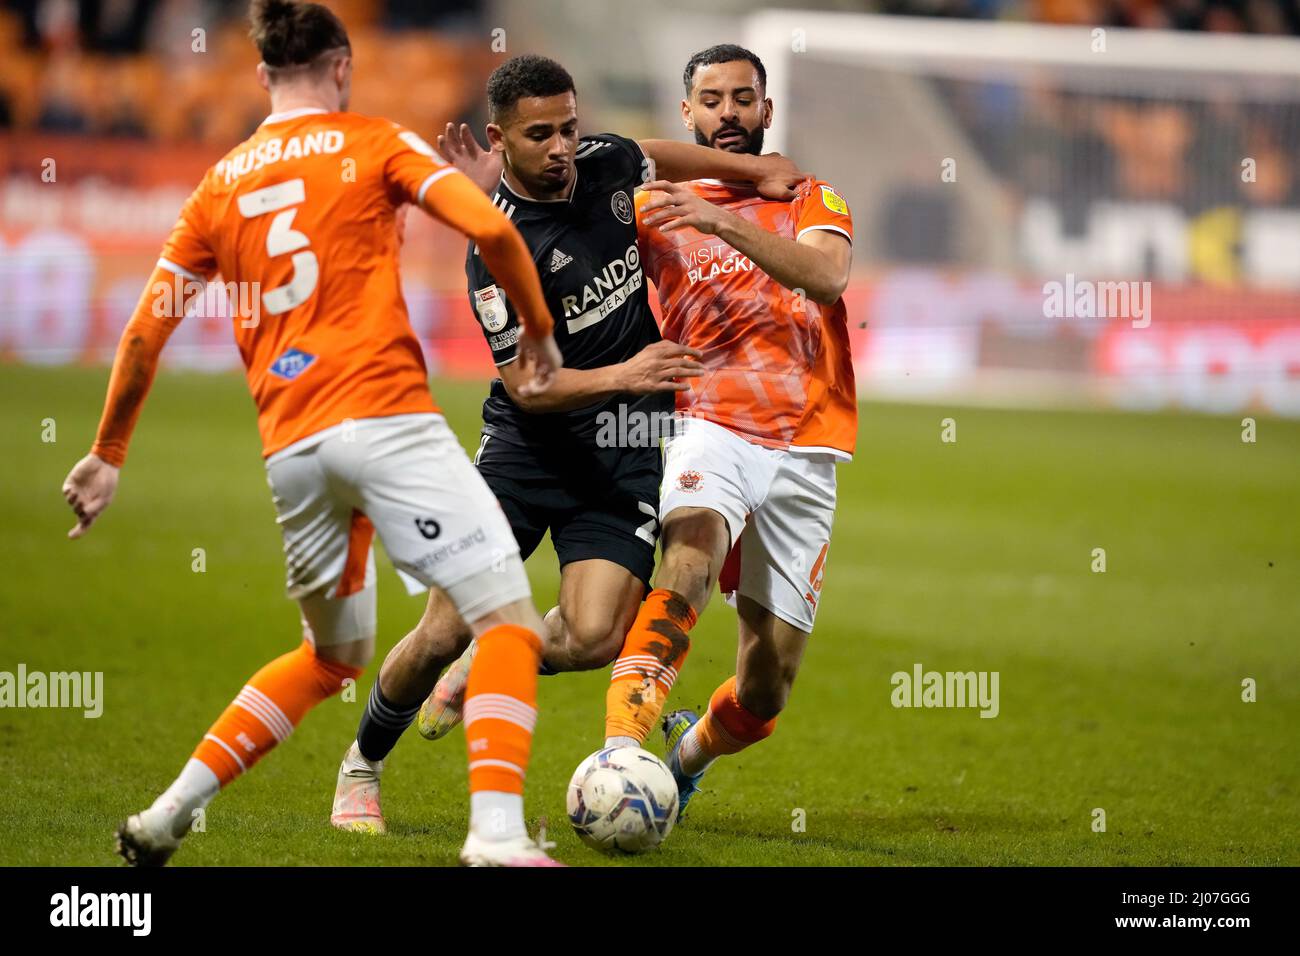 Blackpool, England, 16th March 2022. lliman Ndiaye of Sheffield Utd (C) is challenged by Kevin Stewart of Blackpool (R) and James Husband of Blackpool during the Sky Bet Championship match at Bloomfield Road, Blackpool. Picture credit should read: Andrew Yates / Sportimage Credit: Sportimage/Alamy Live News Stock Photo